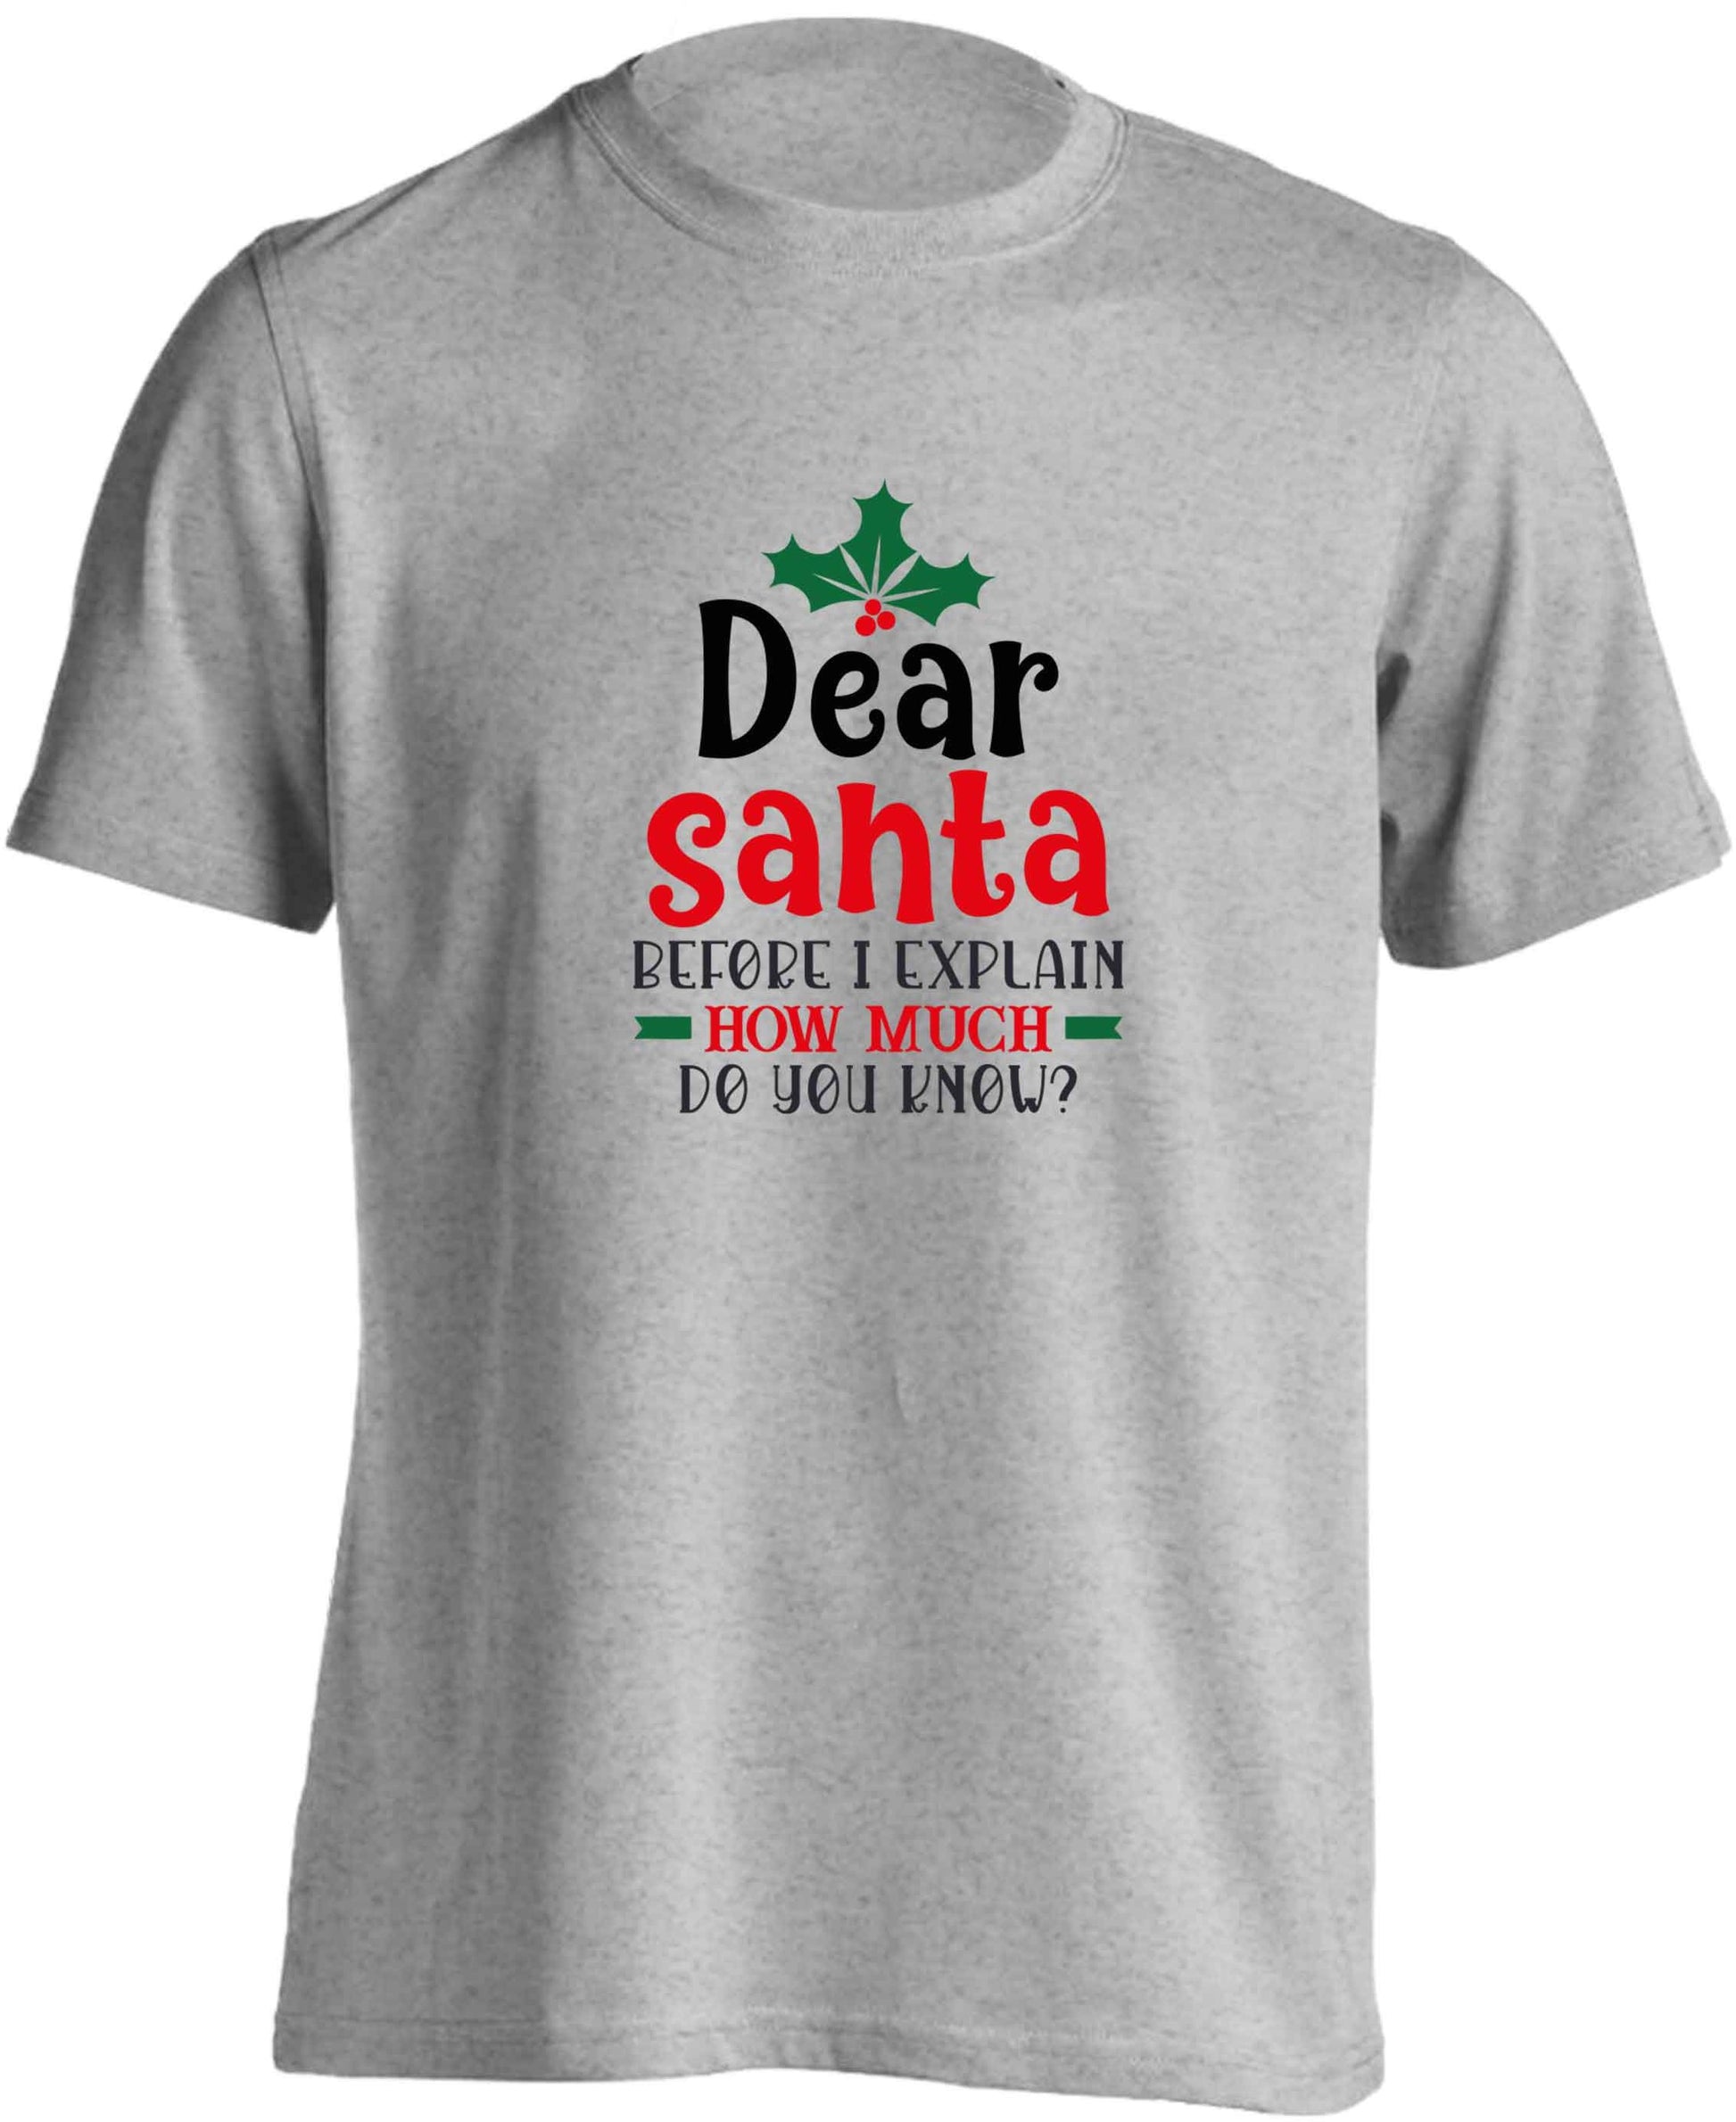 Santa before I explain how much do you know? adults unisex grey Tshirt 2XL